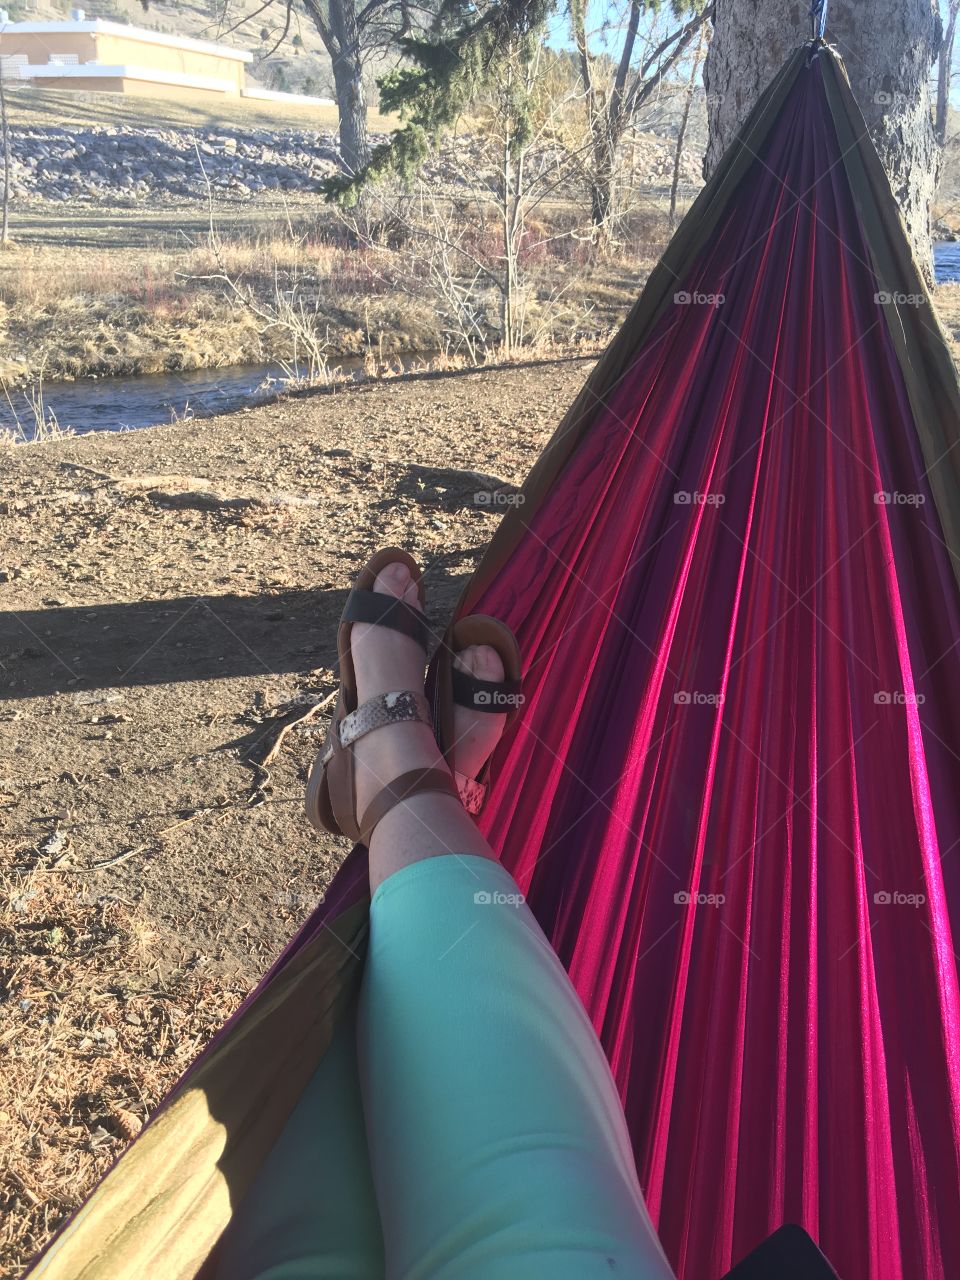 view from a hammock